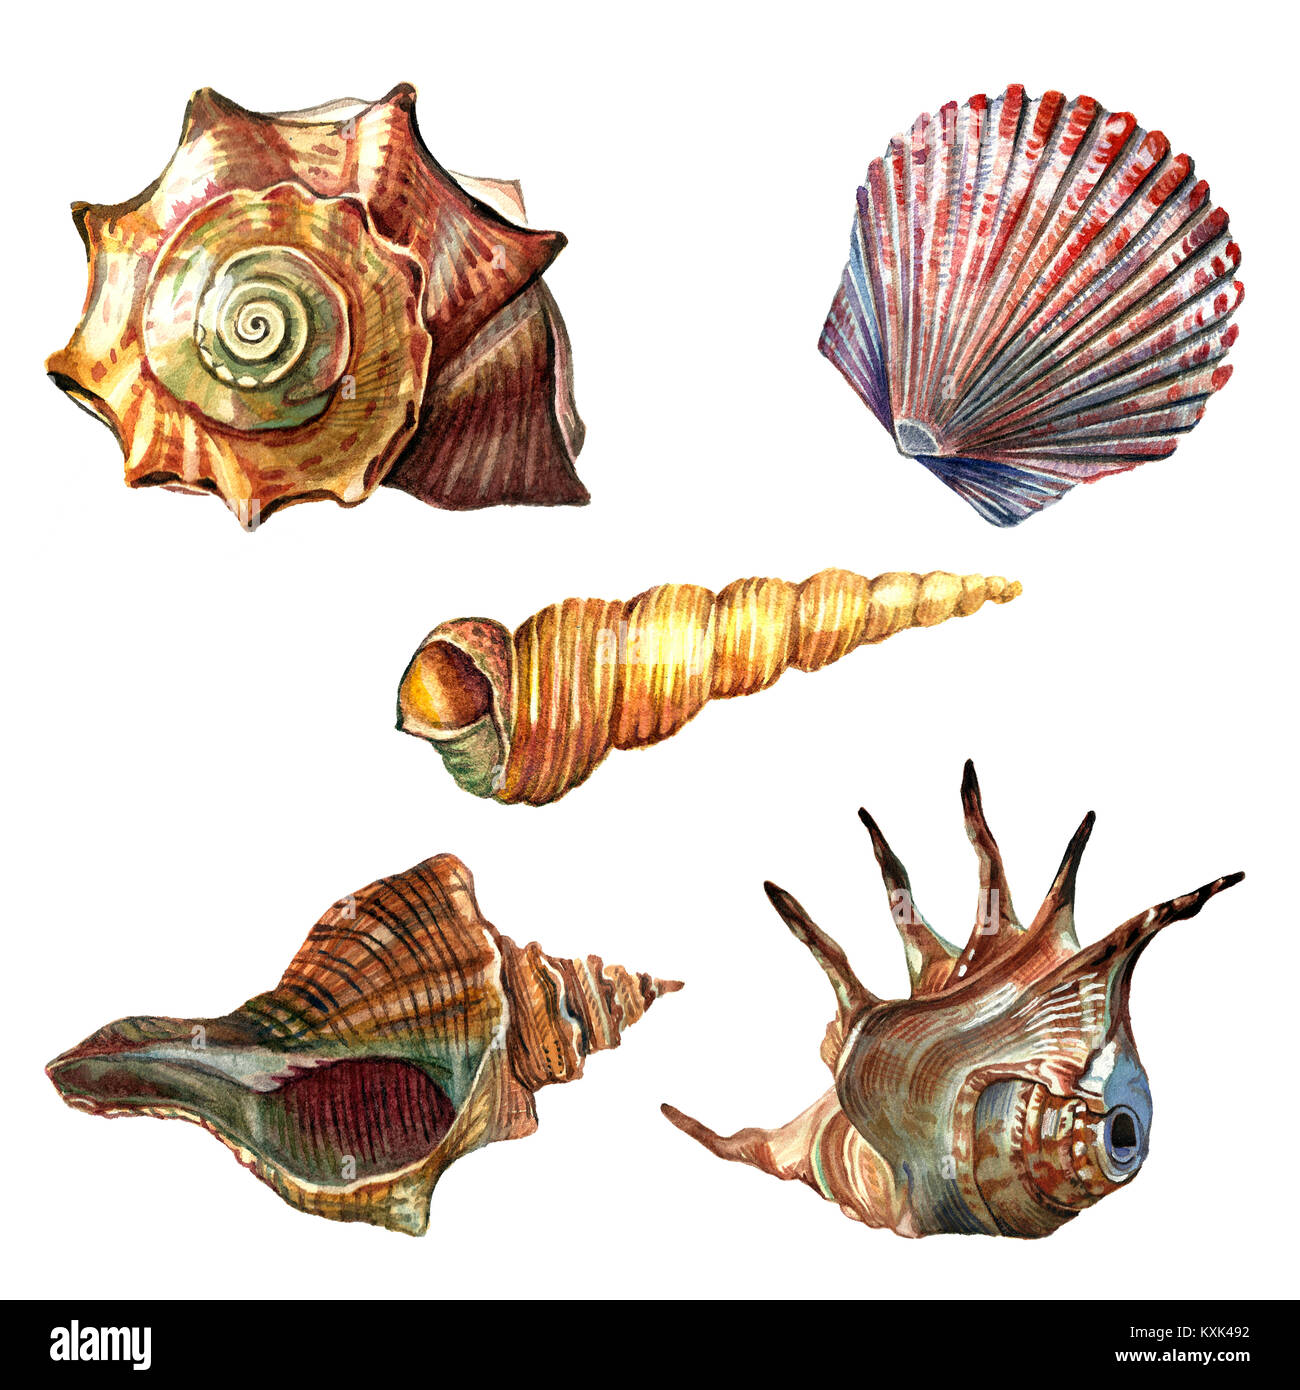 Shells drawing Cut Out Stock Images & Pictures - Alamy